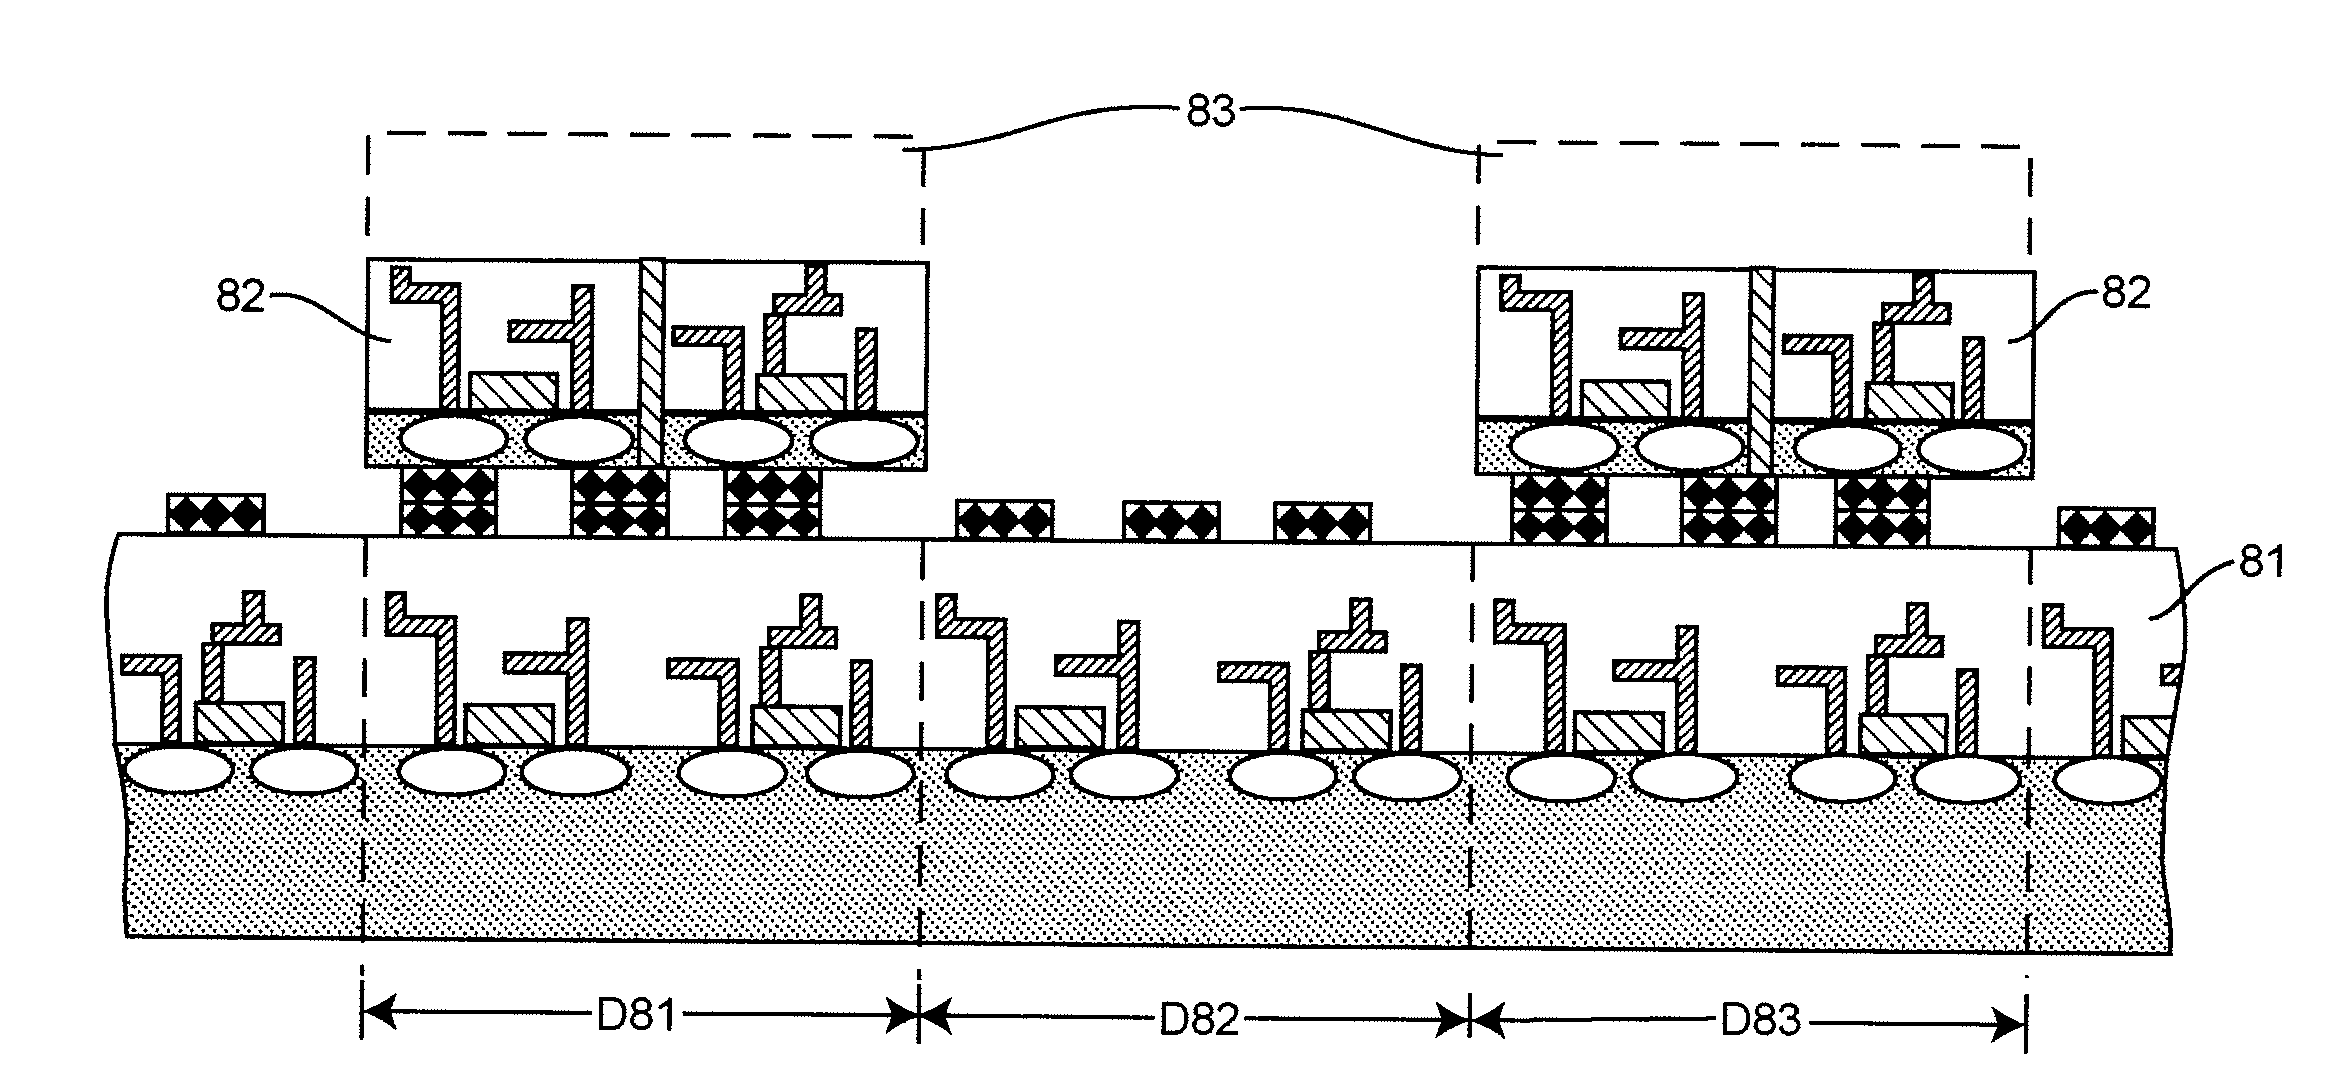 Method and Structure for Optimizing Yield of 3-D Chip Manufacture